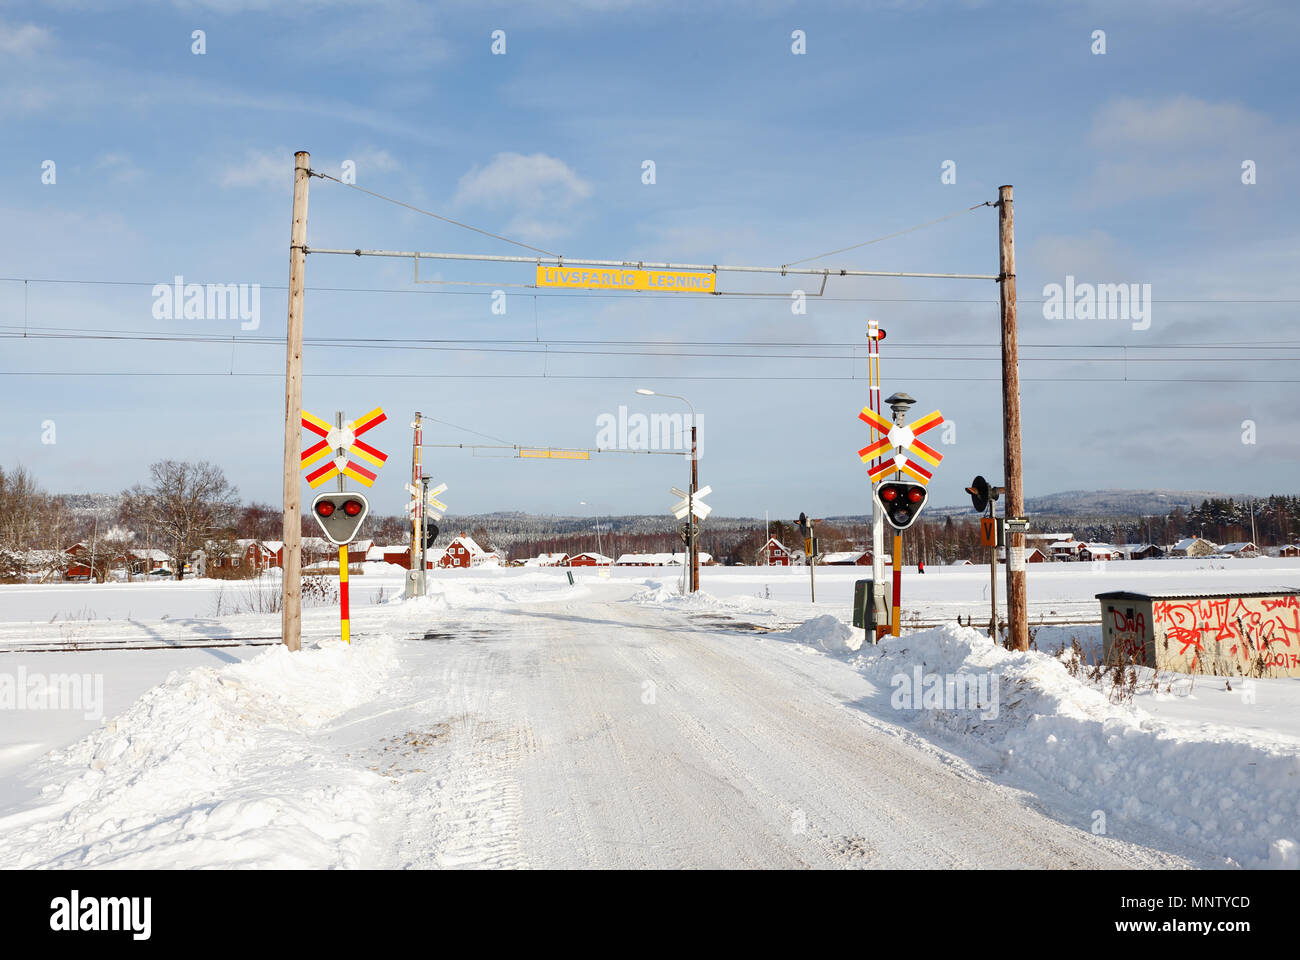 Gagnef, Sweden - February 9, 2018: Swedish railroad crossing with bars, sound and light signals in the countryside during winter time. Stock Photo